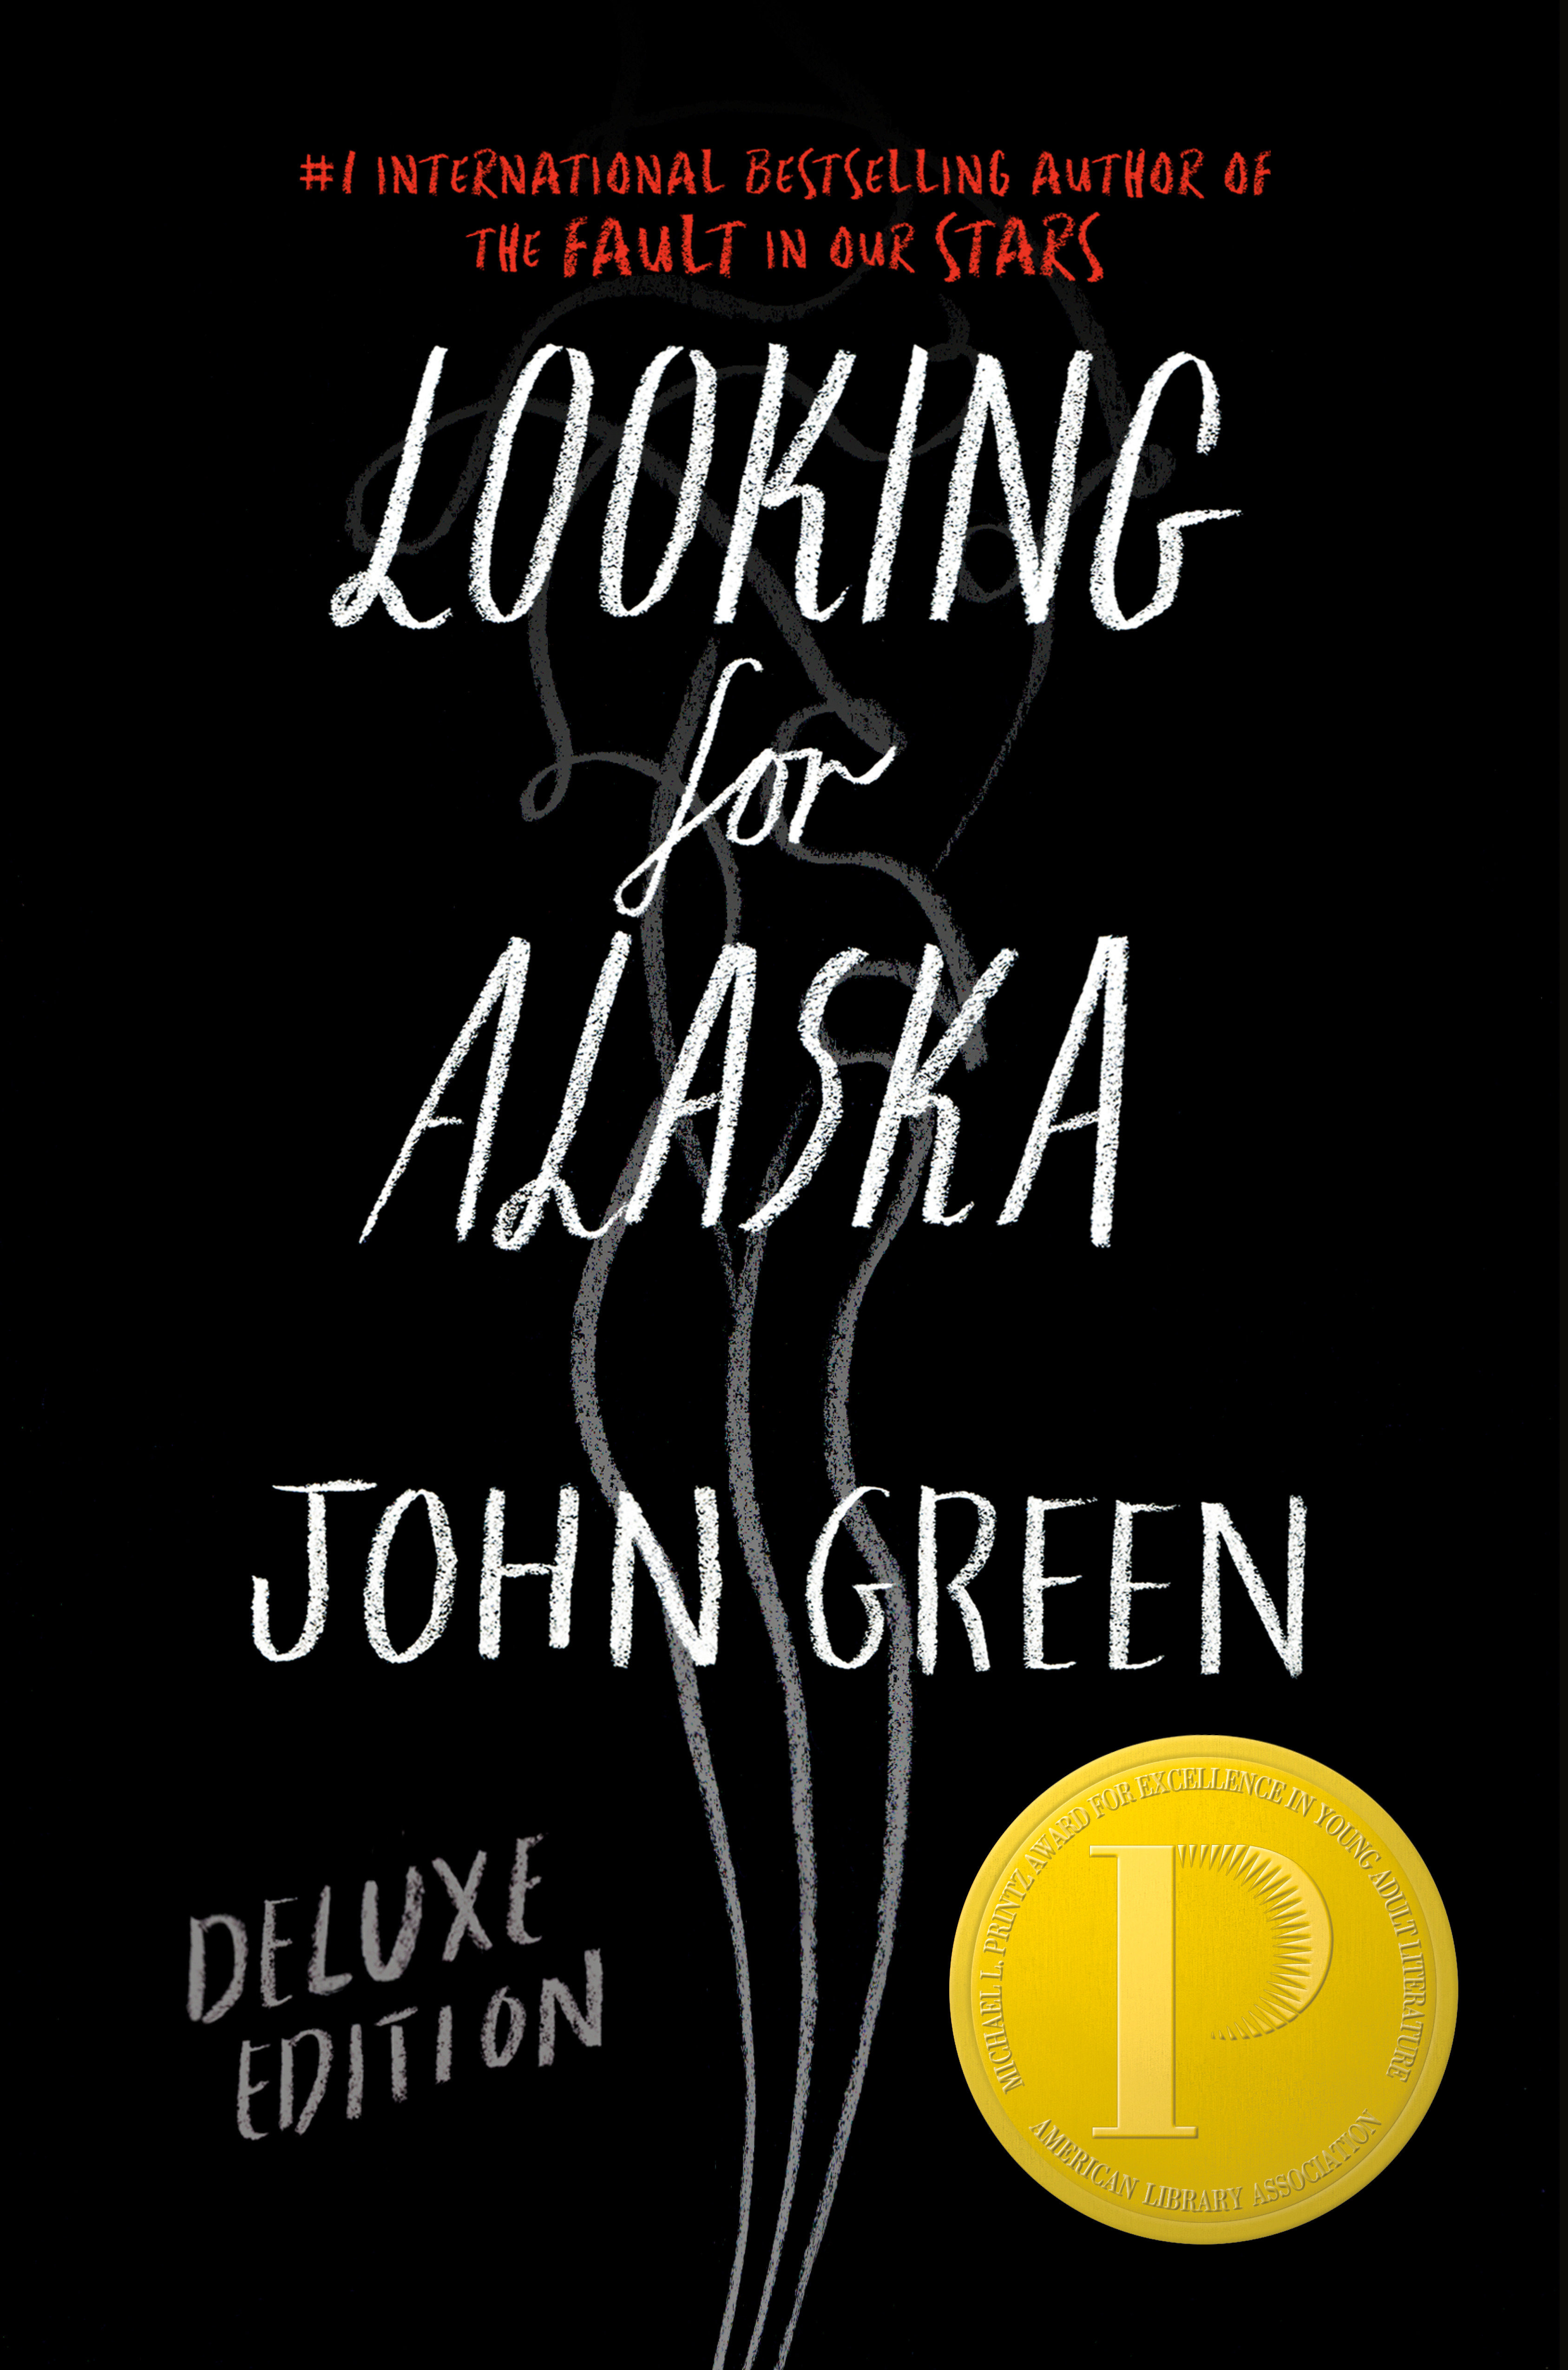 Looking for Alaska Deluxe Edition (Hardcover Book)